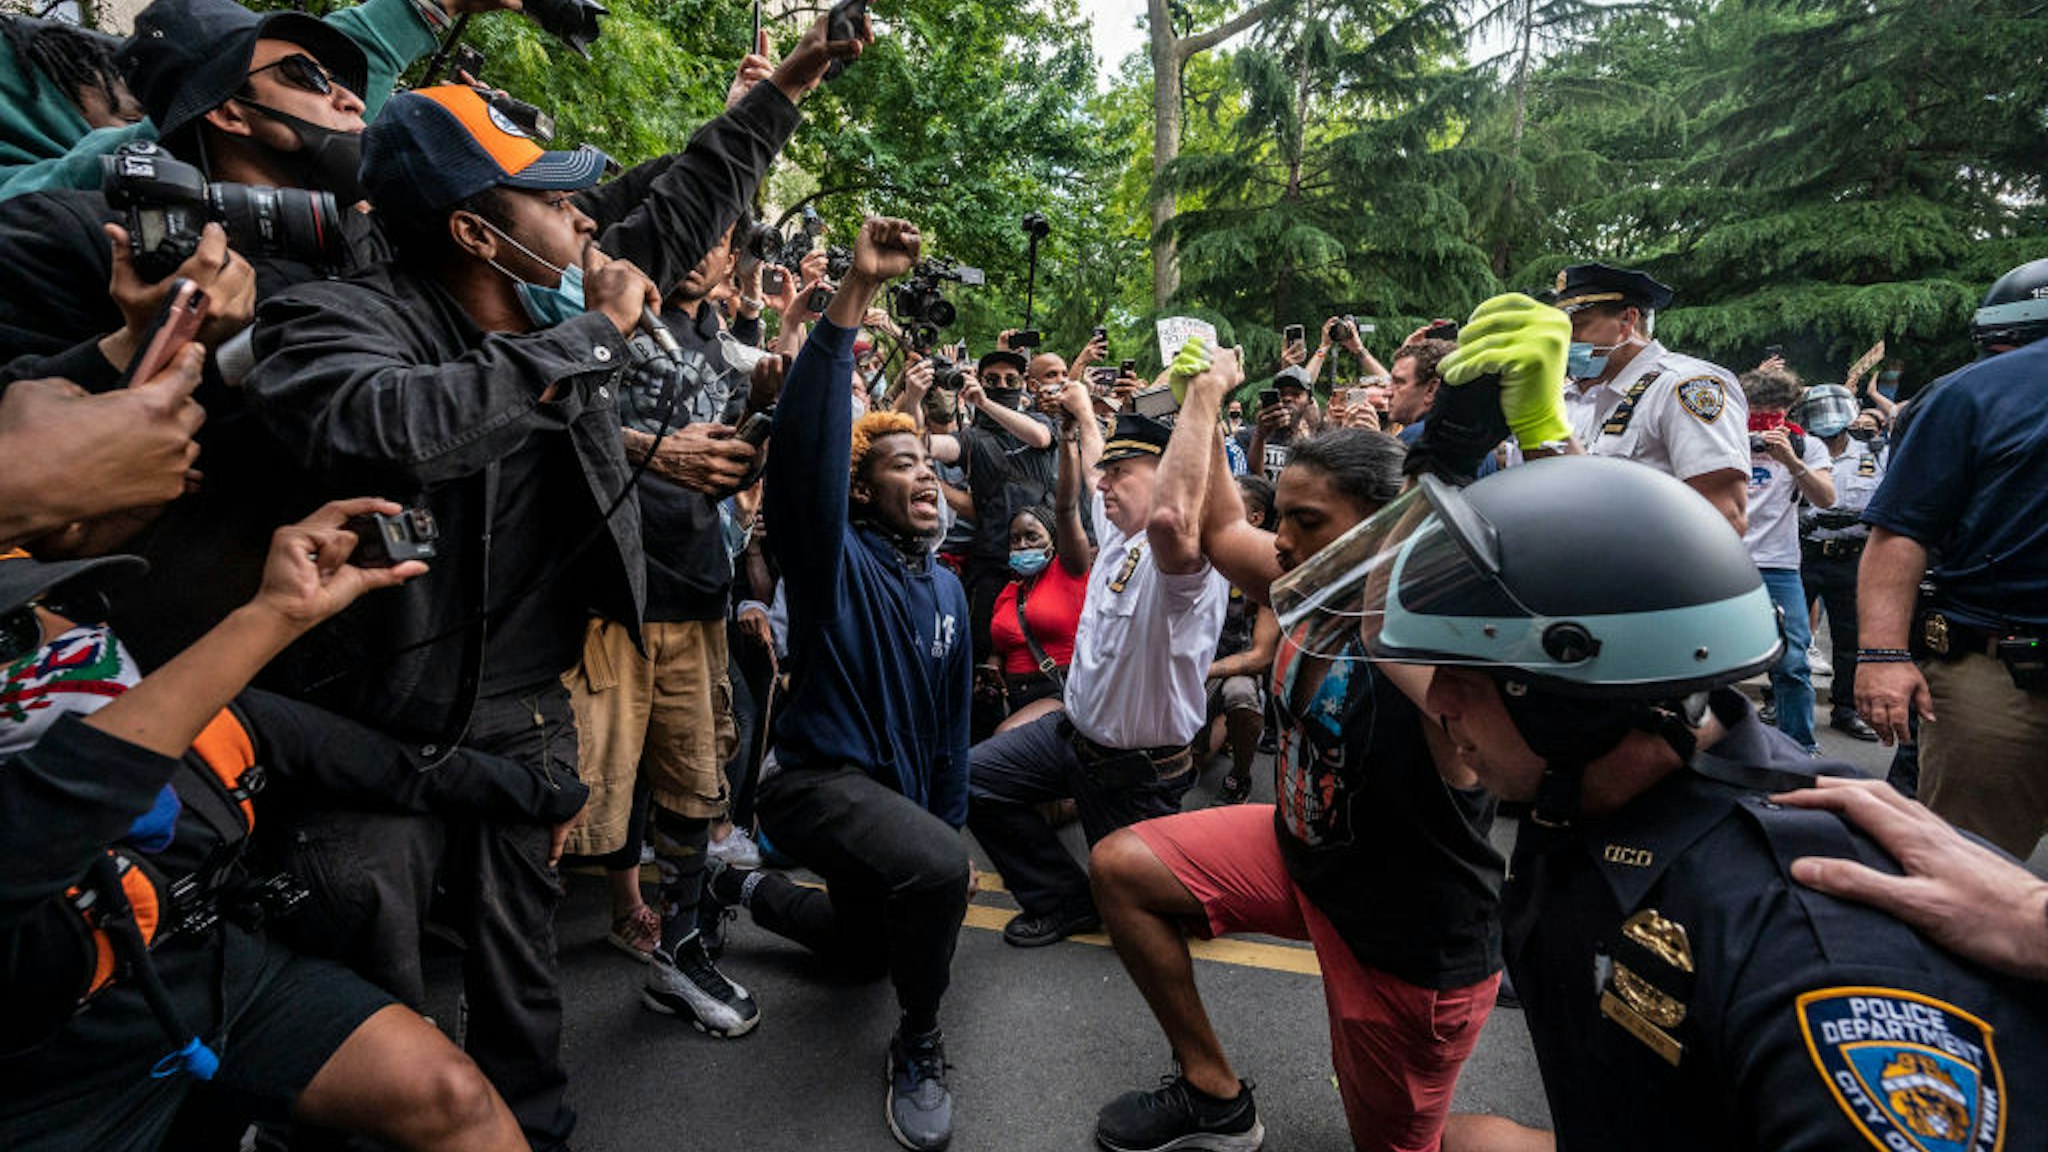 New York, N.Y.: Chief of Department of the New York City Police, Terence Monahan, takes a knee with activists as protesters paused while walking in Manhattan on June 1, 2020.